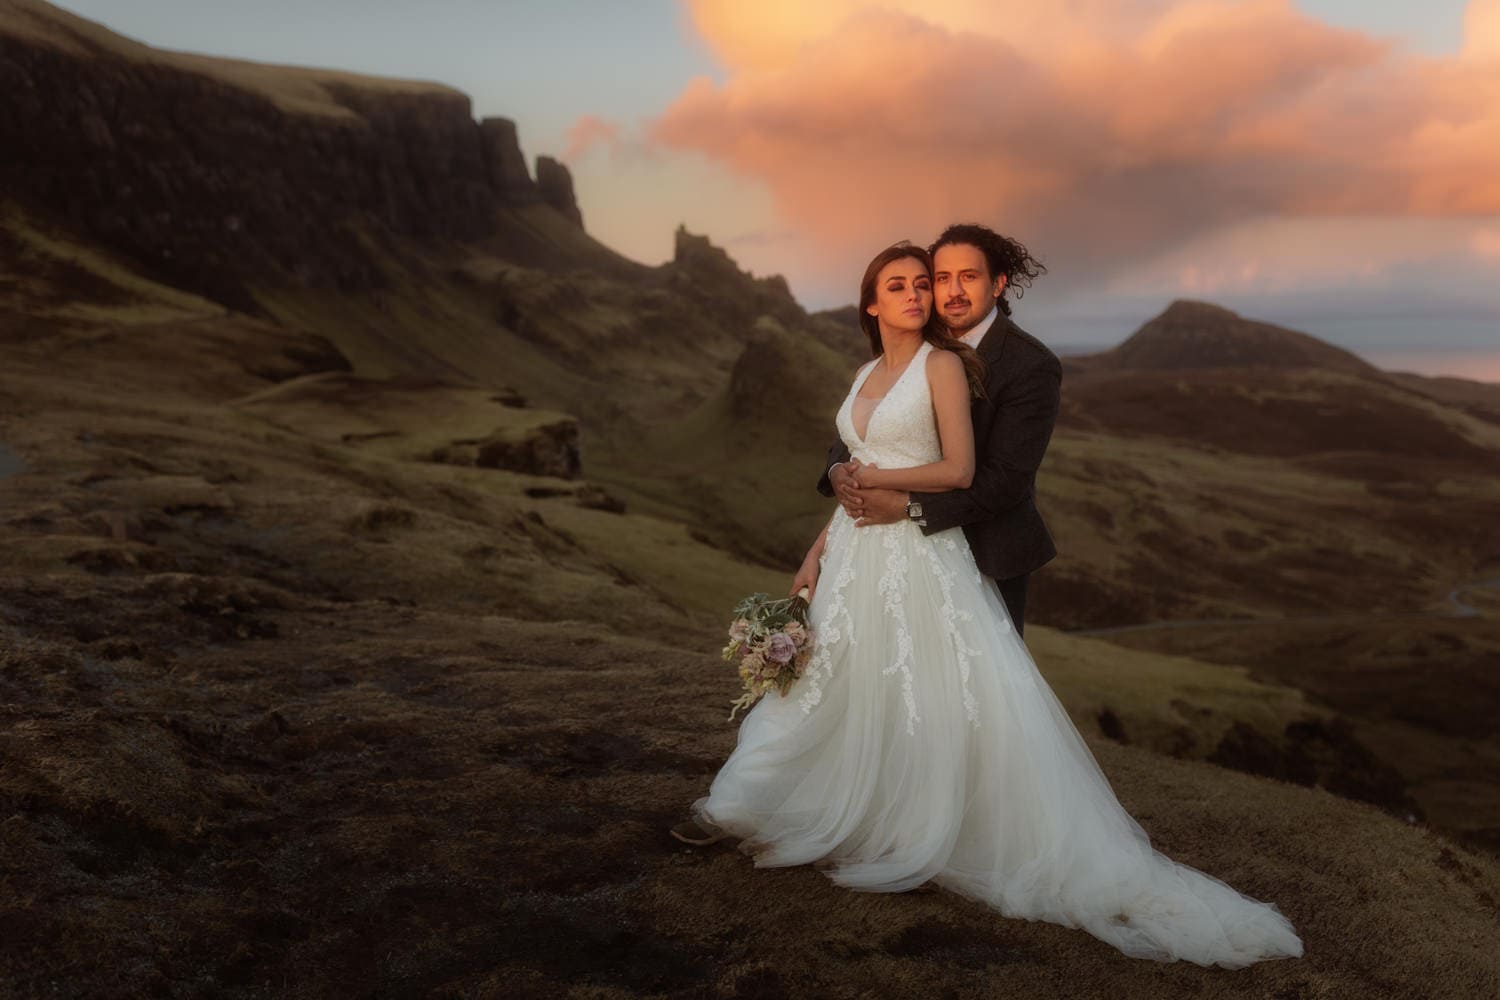 Eloping couple from Mexico embrace watching sunset at the Quiraing on the Isle of Skye.